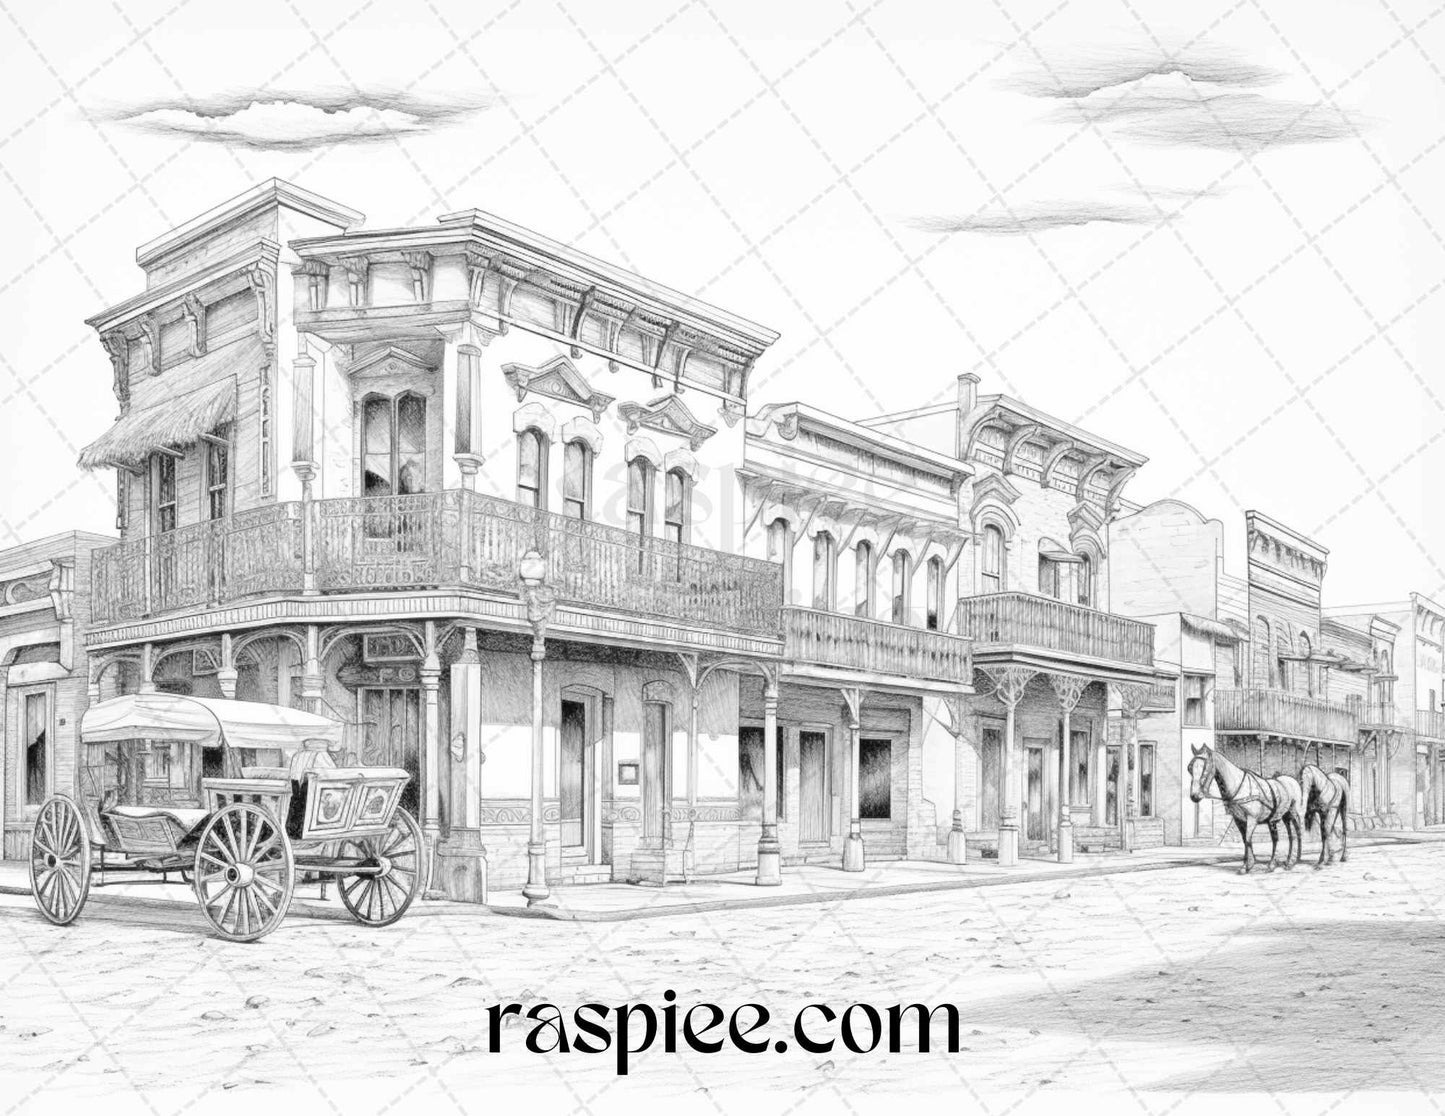 Wild West grayscale coloring pages, vintage Old West illustrations, adult printable coloring pages, western town scenes, cowboy art therapy, instant download coloring sheets